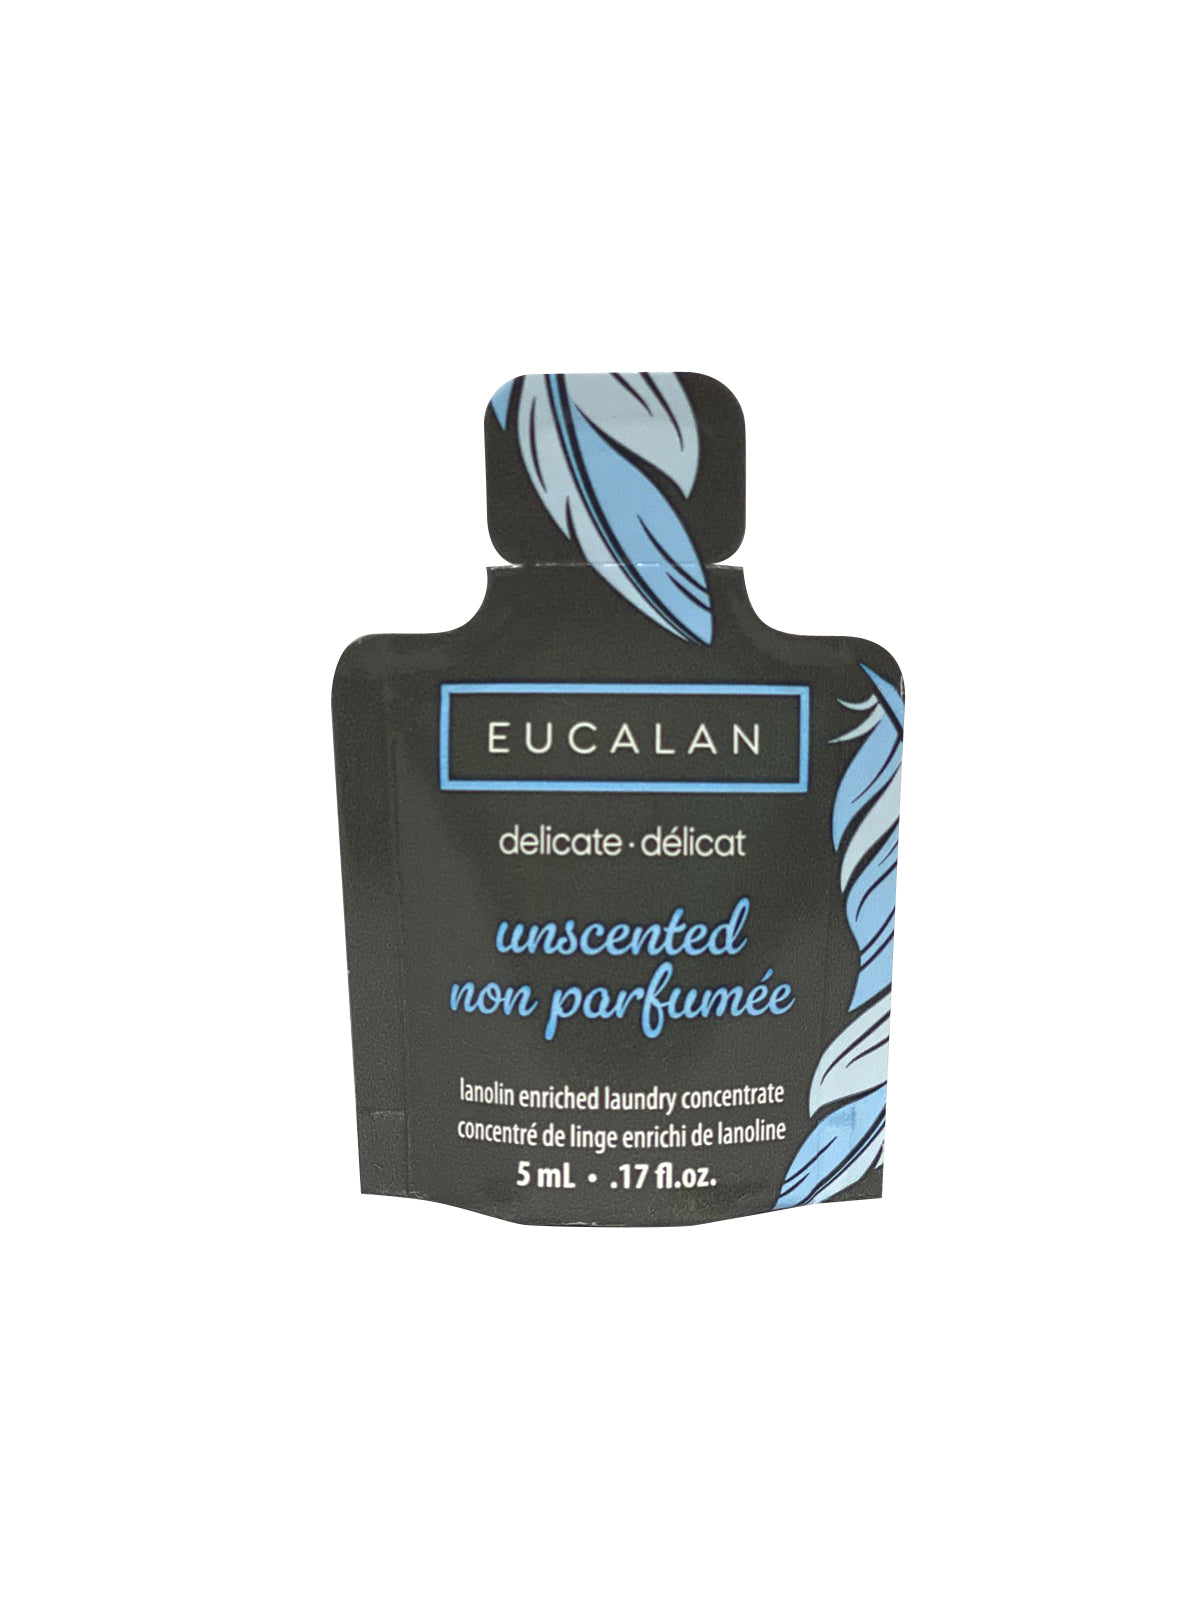 Unscented single packet of Eucalan Unscented